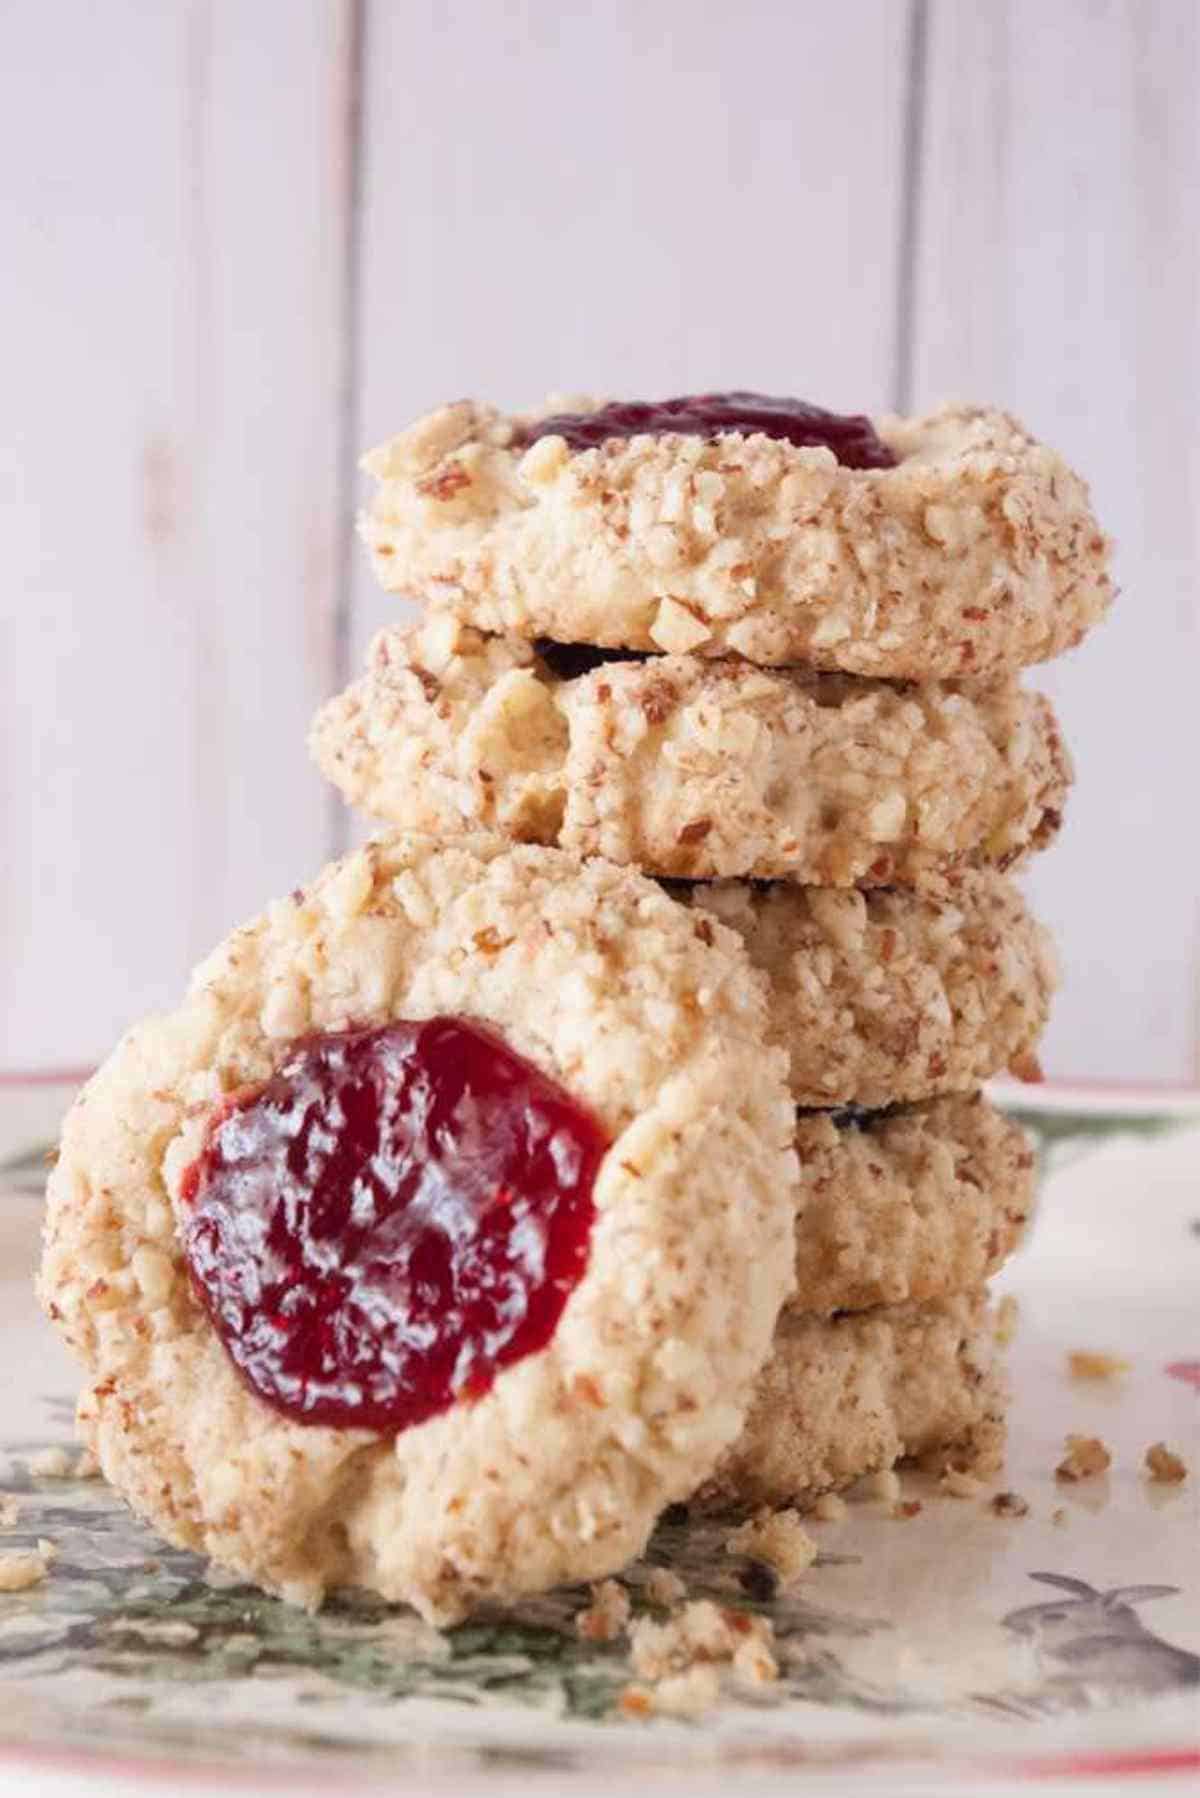 A neat stack of jam filled thumbprint cookies.